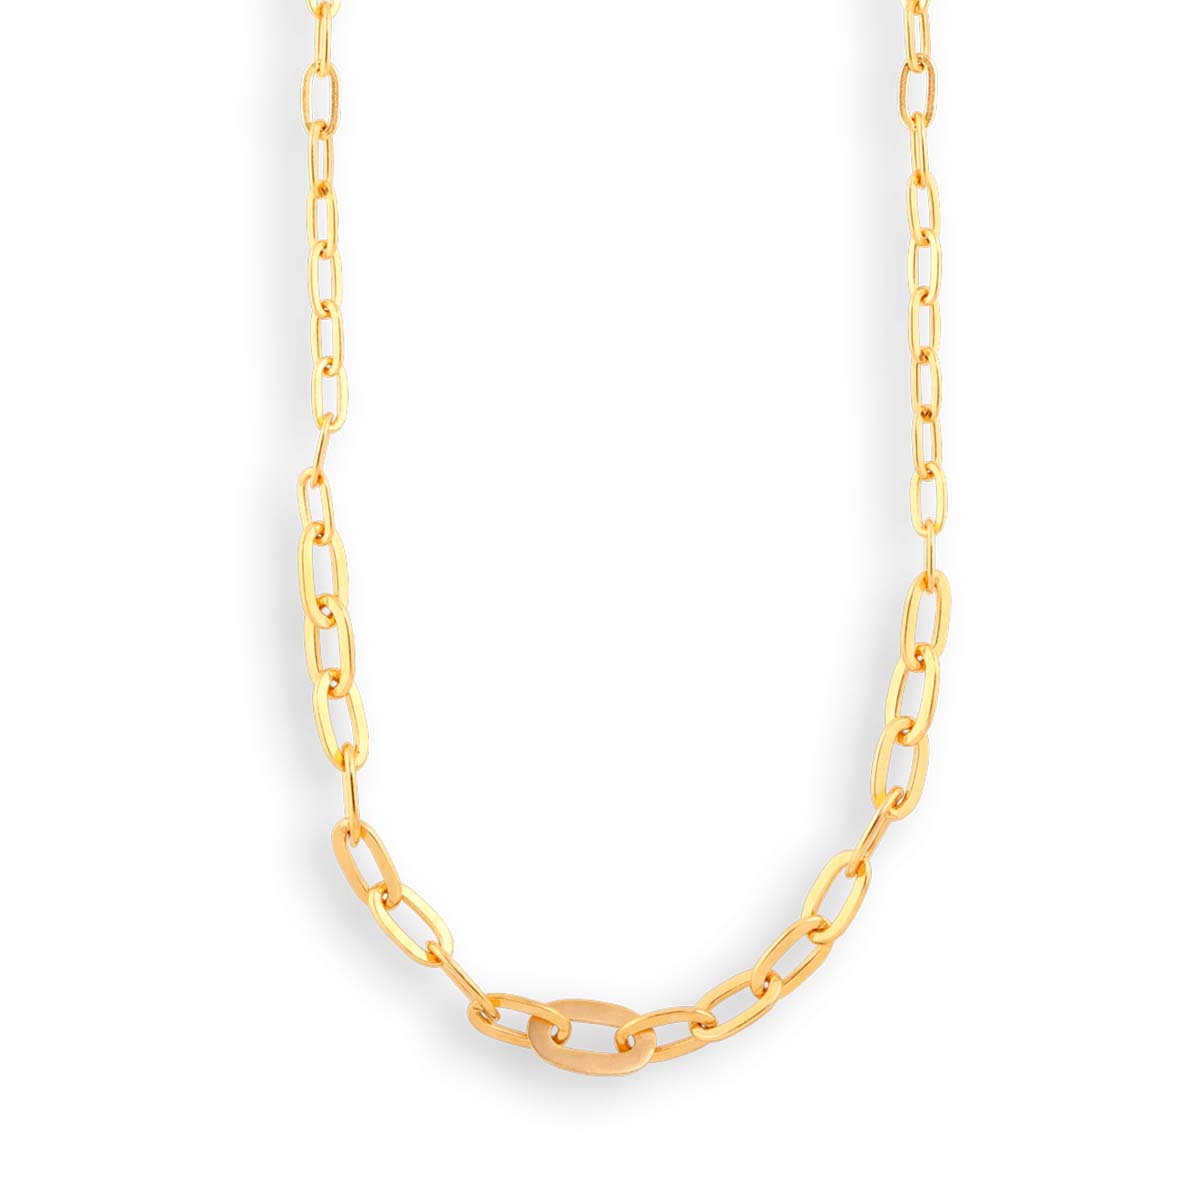 JANE KOENIG Row Gold Plated Necklace